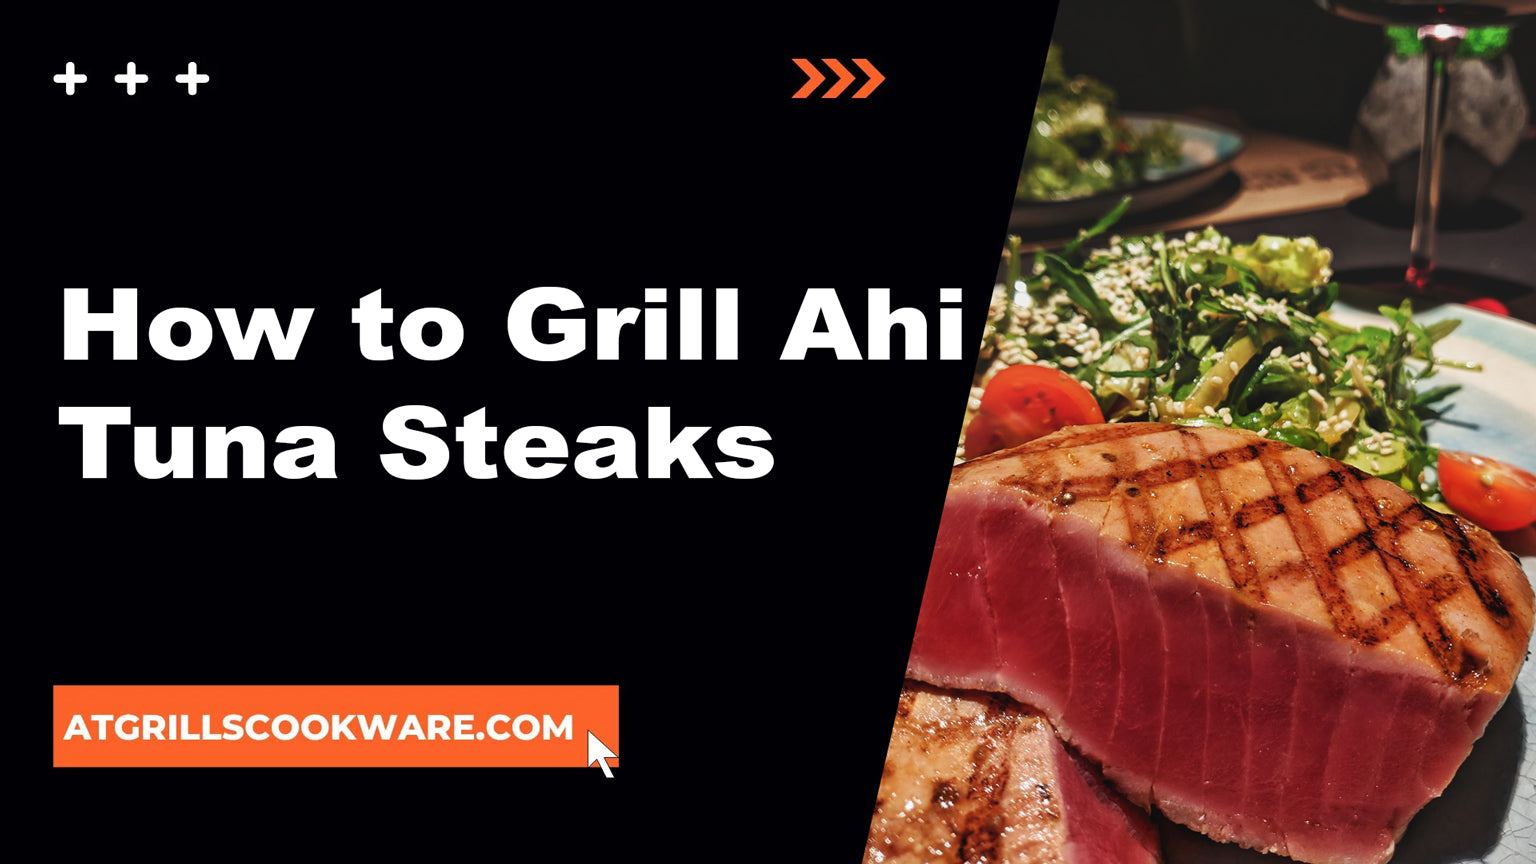 How to Grill Ahi Tuna Steaks: A Step by Step Guide